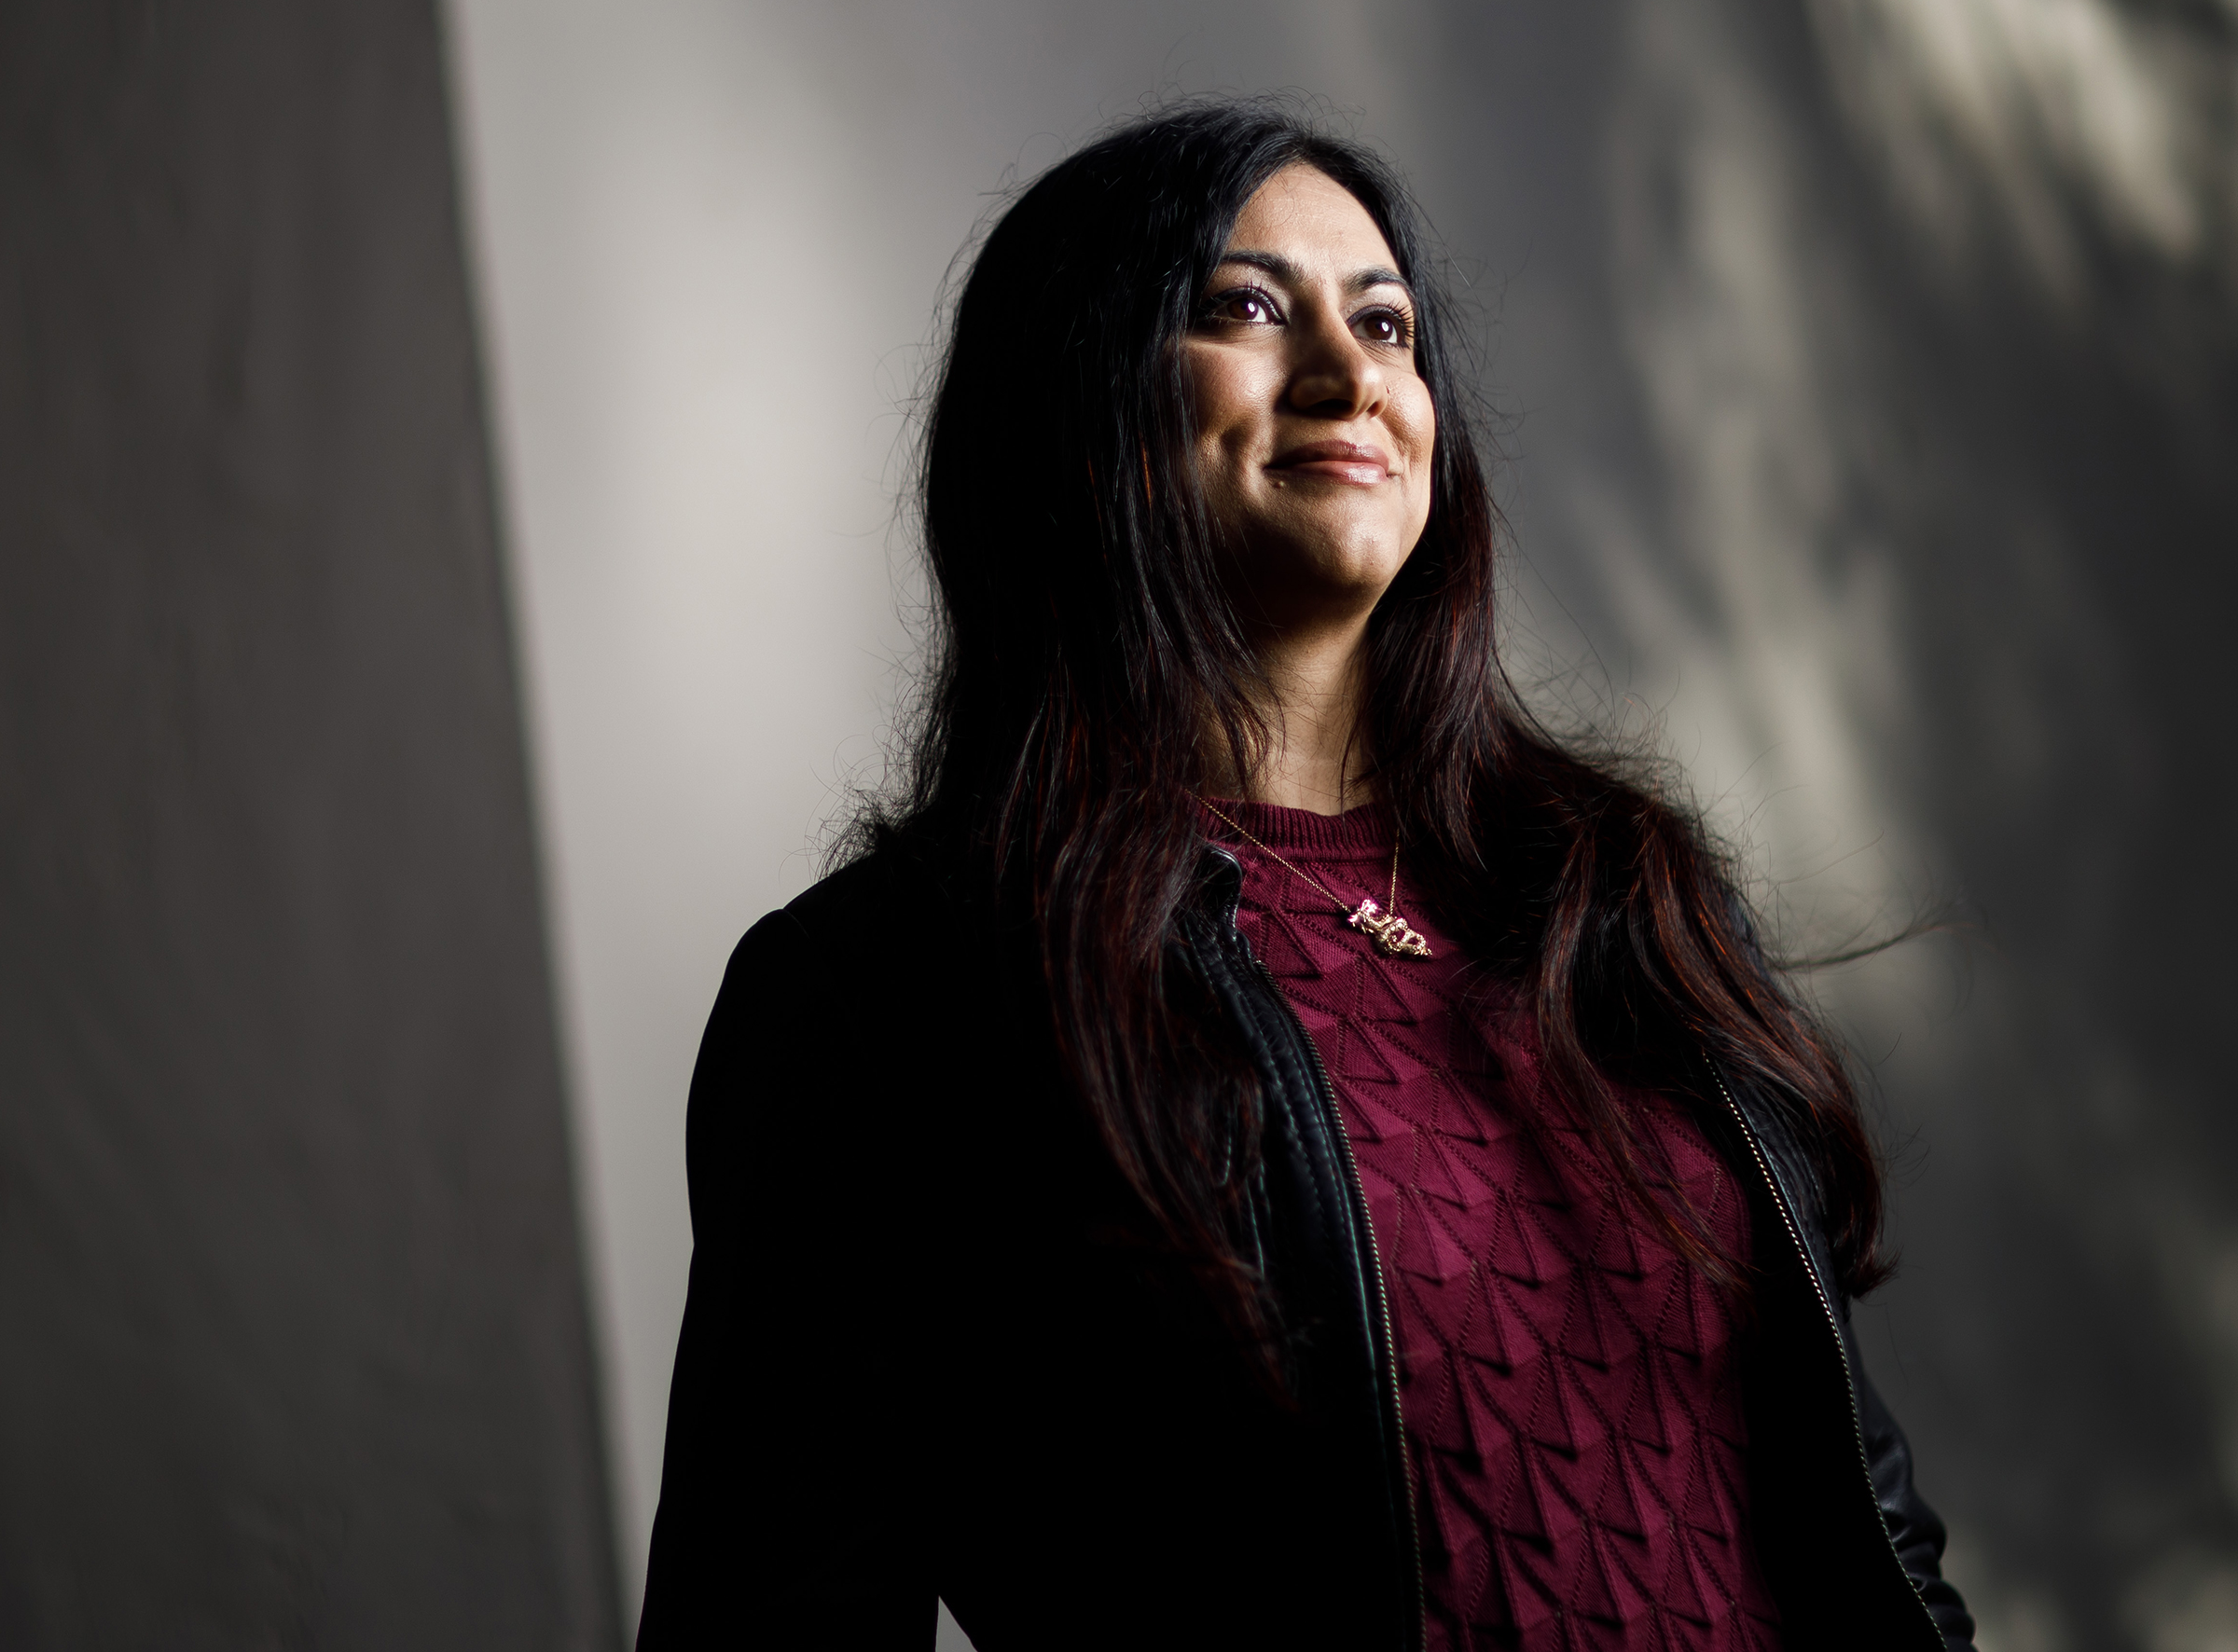 Author Sabaa Tahir poses for a portrait on Dec. 1, 2020, in Mountain View, California.